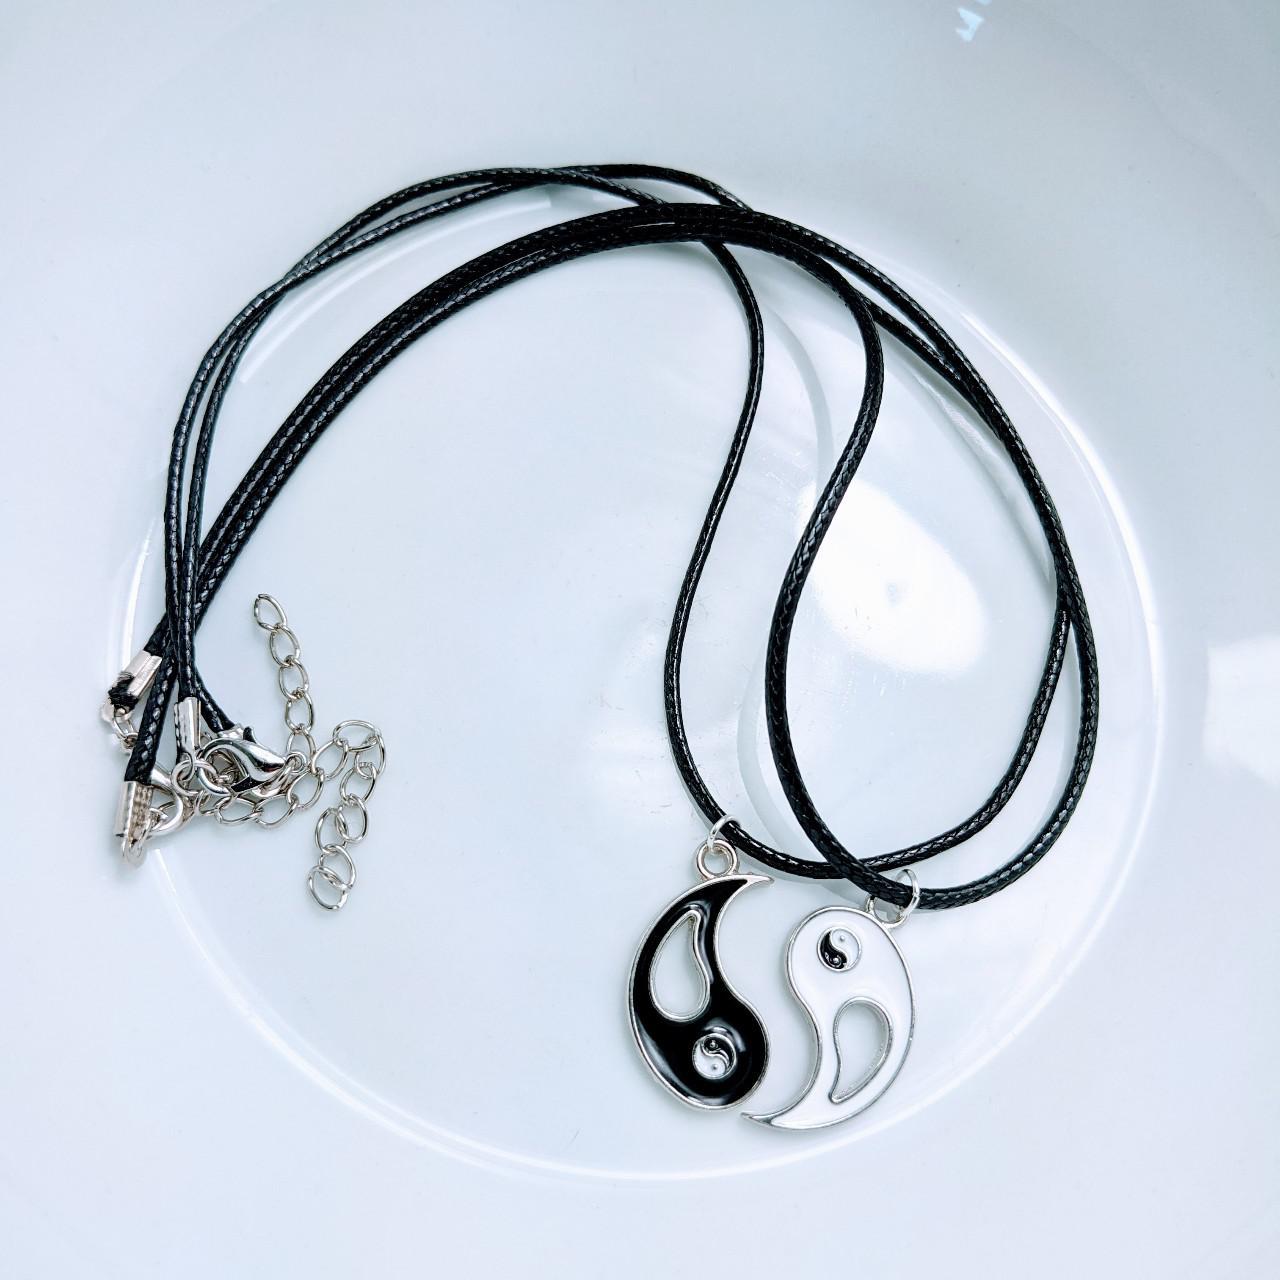 Product Image 3 - Double Yin Yang Necklace. 
This